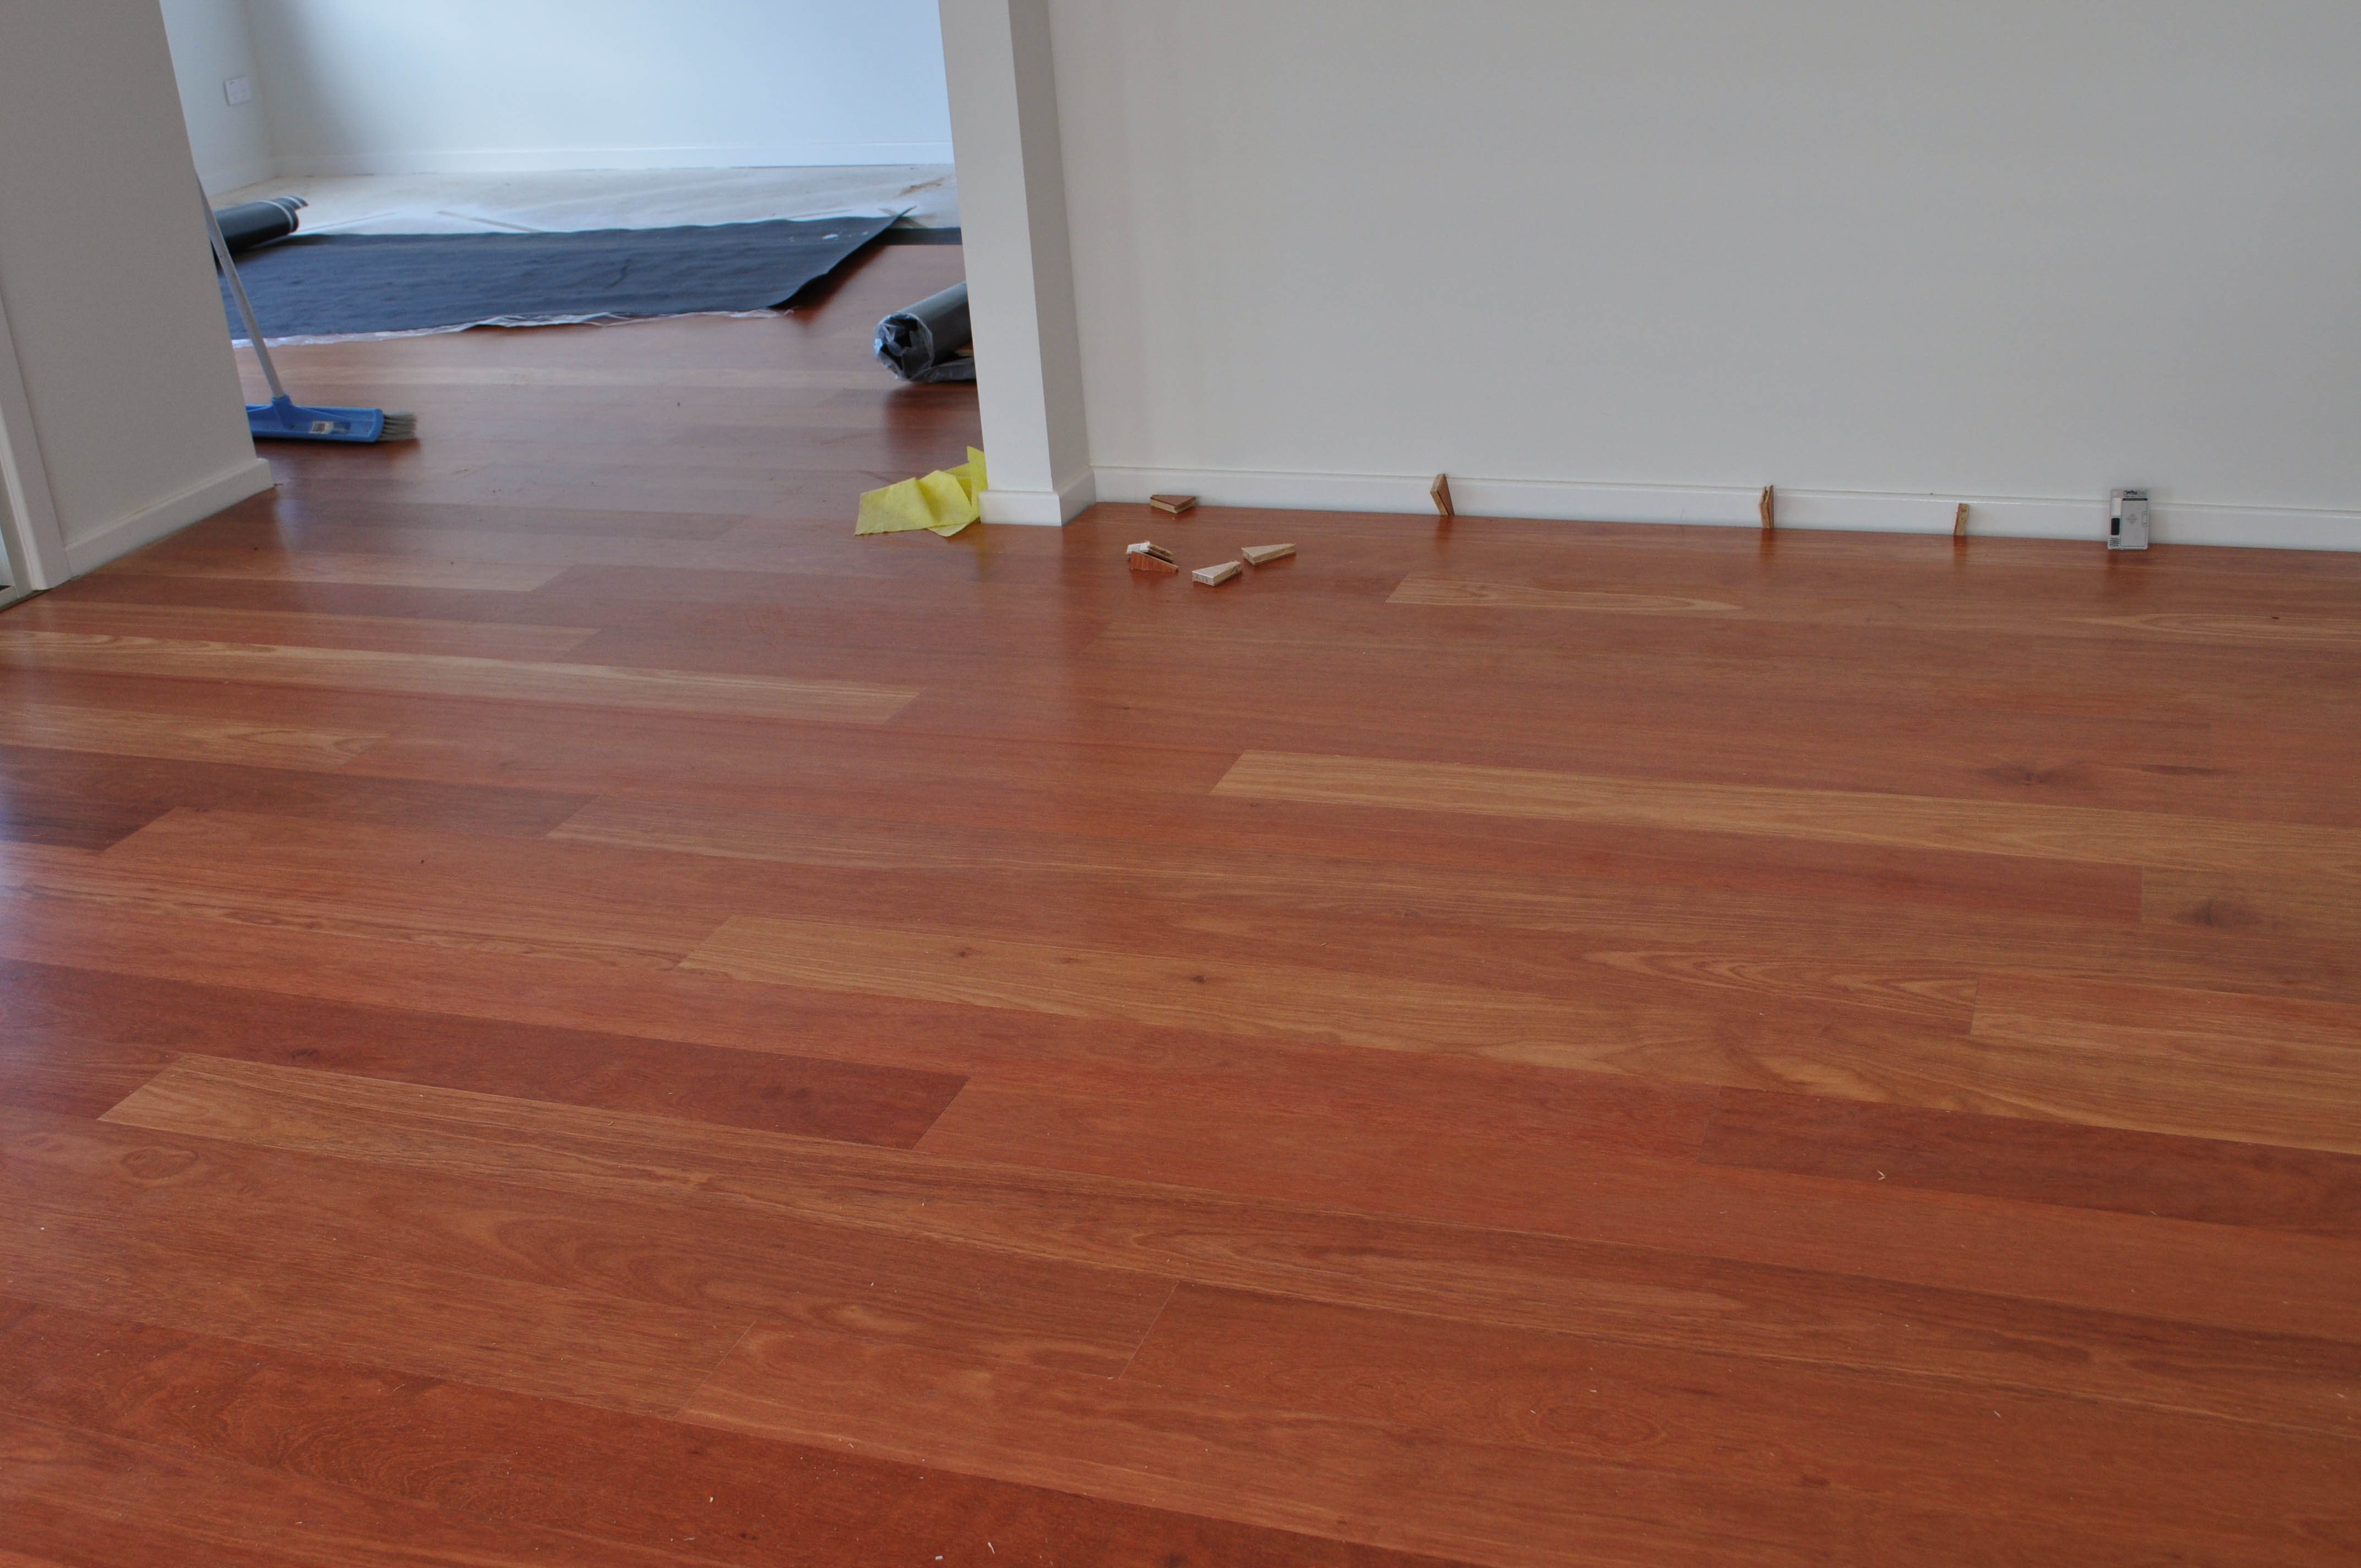 Showing a kempes hardwood timber floor  being installed by Concord Floors in a home in Melton